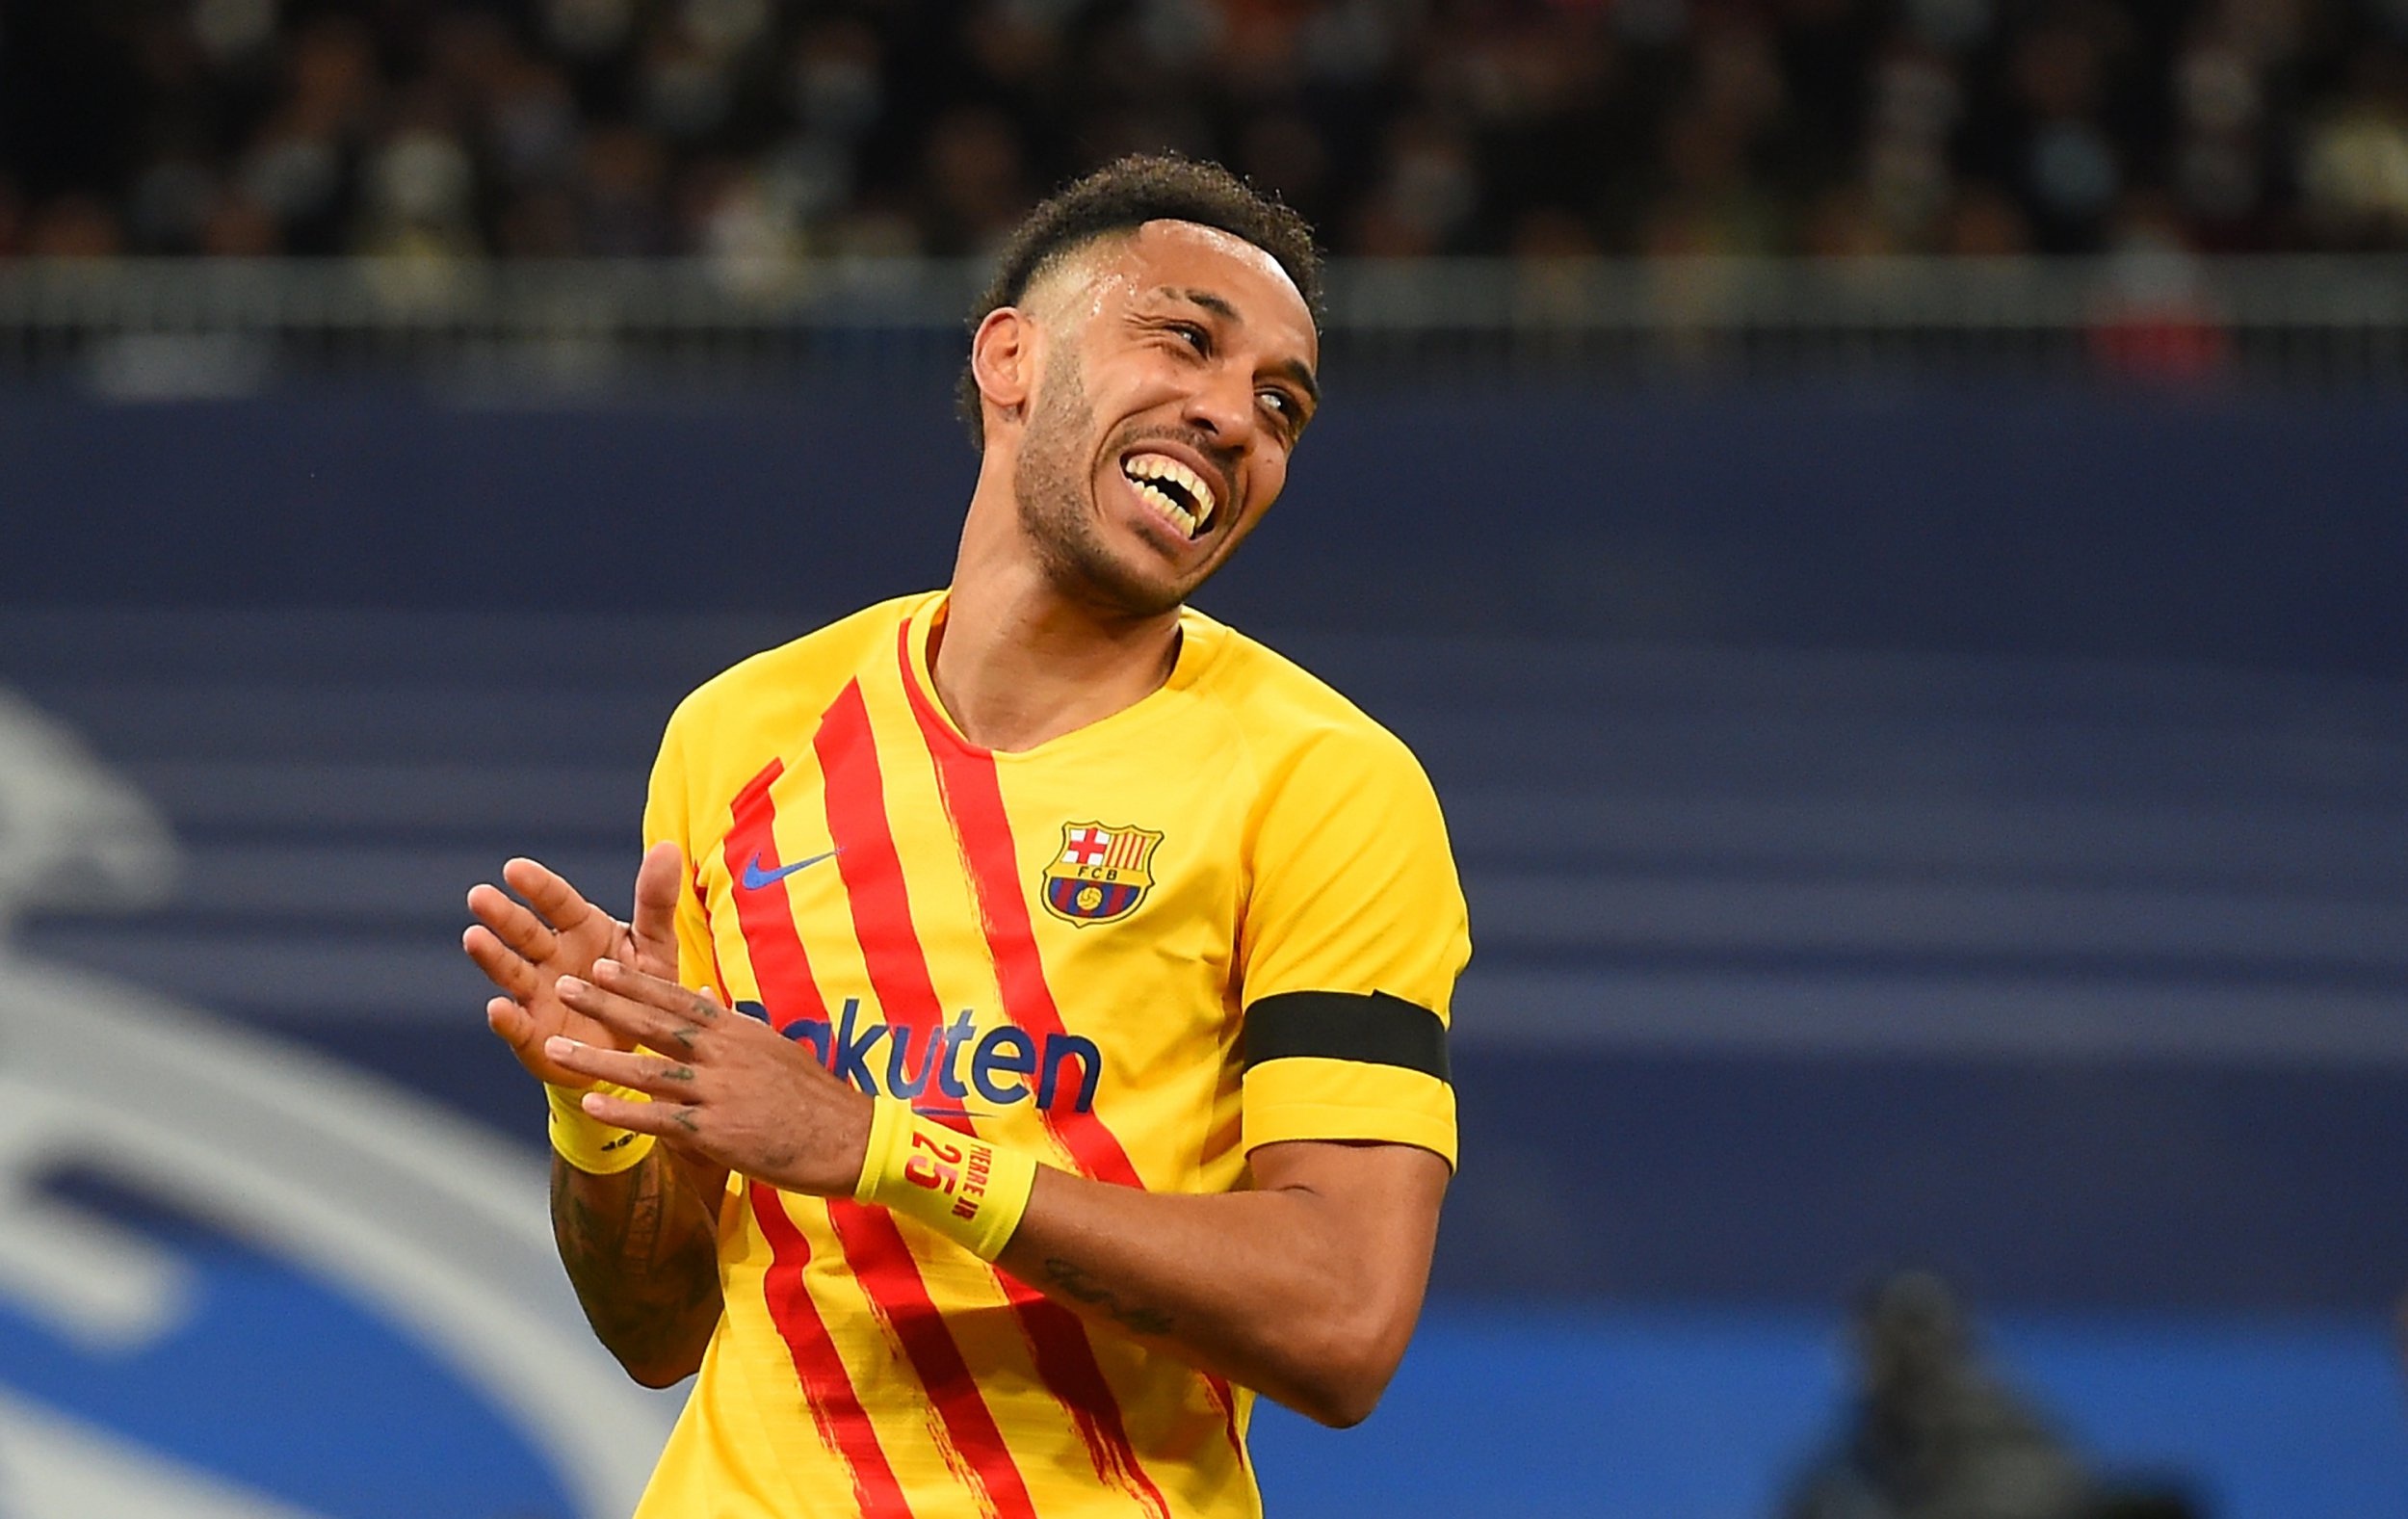 Pierre-Emerick Aubameyang has scored seven goals in as many games for Barcelona